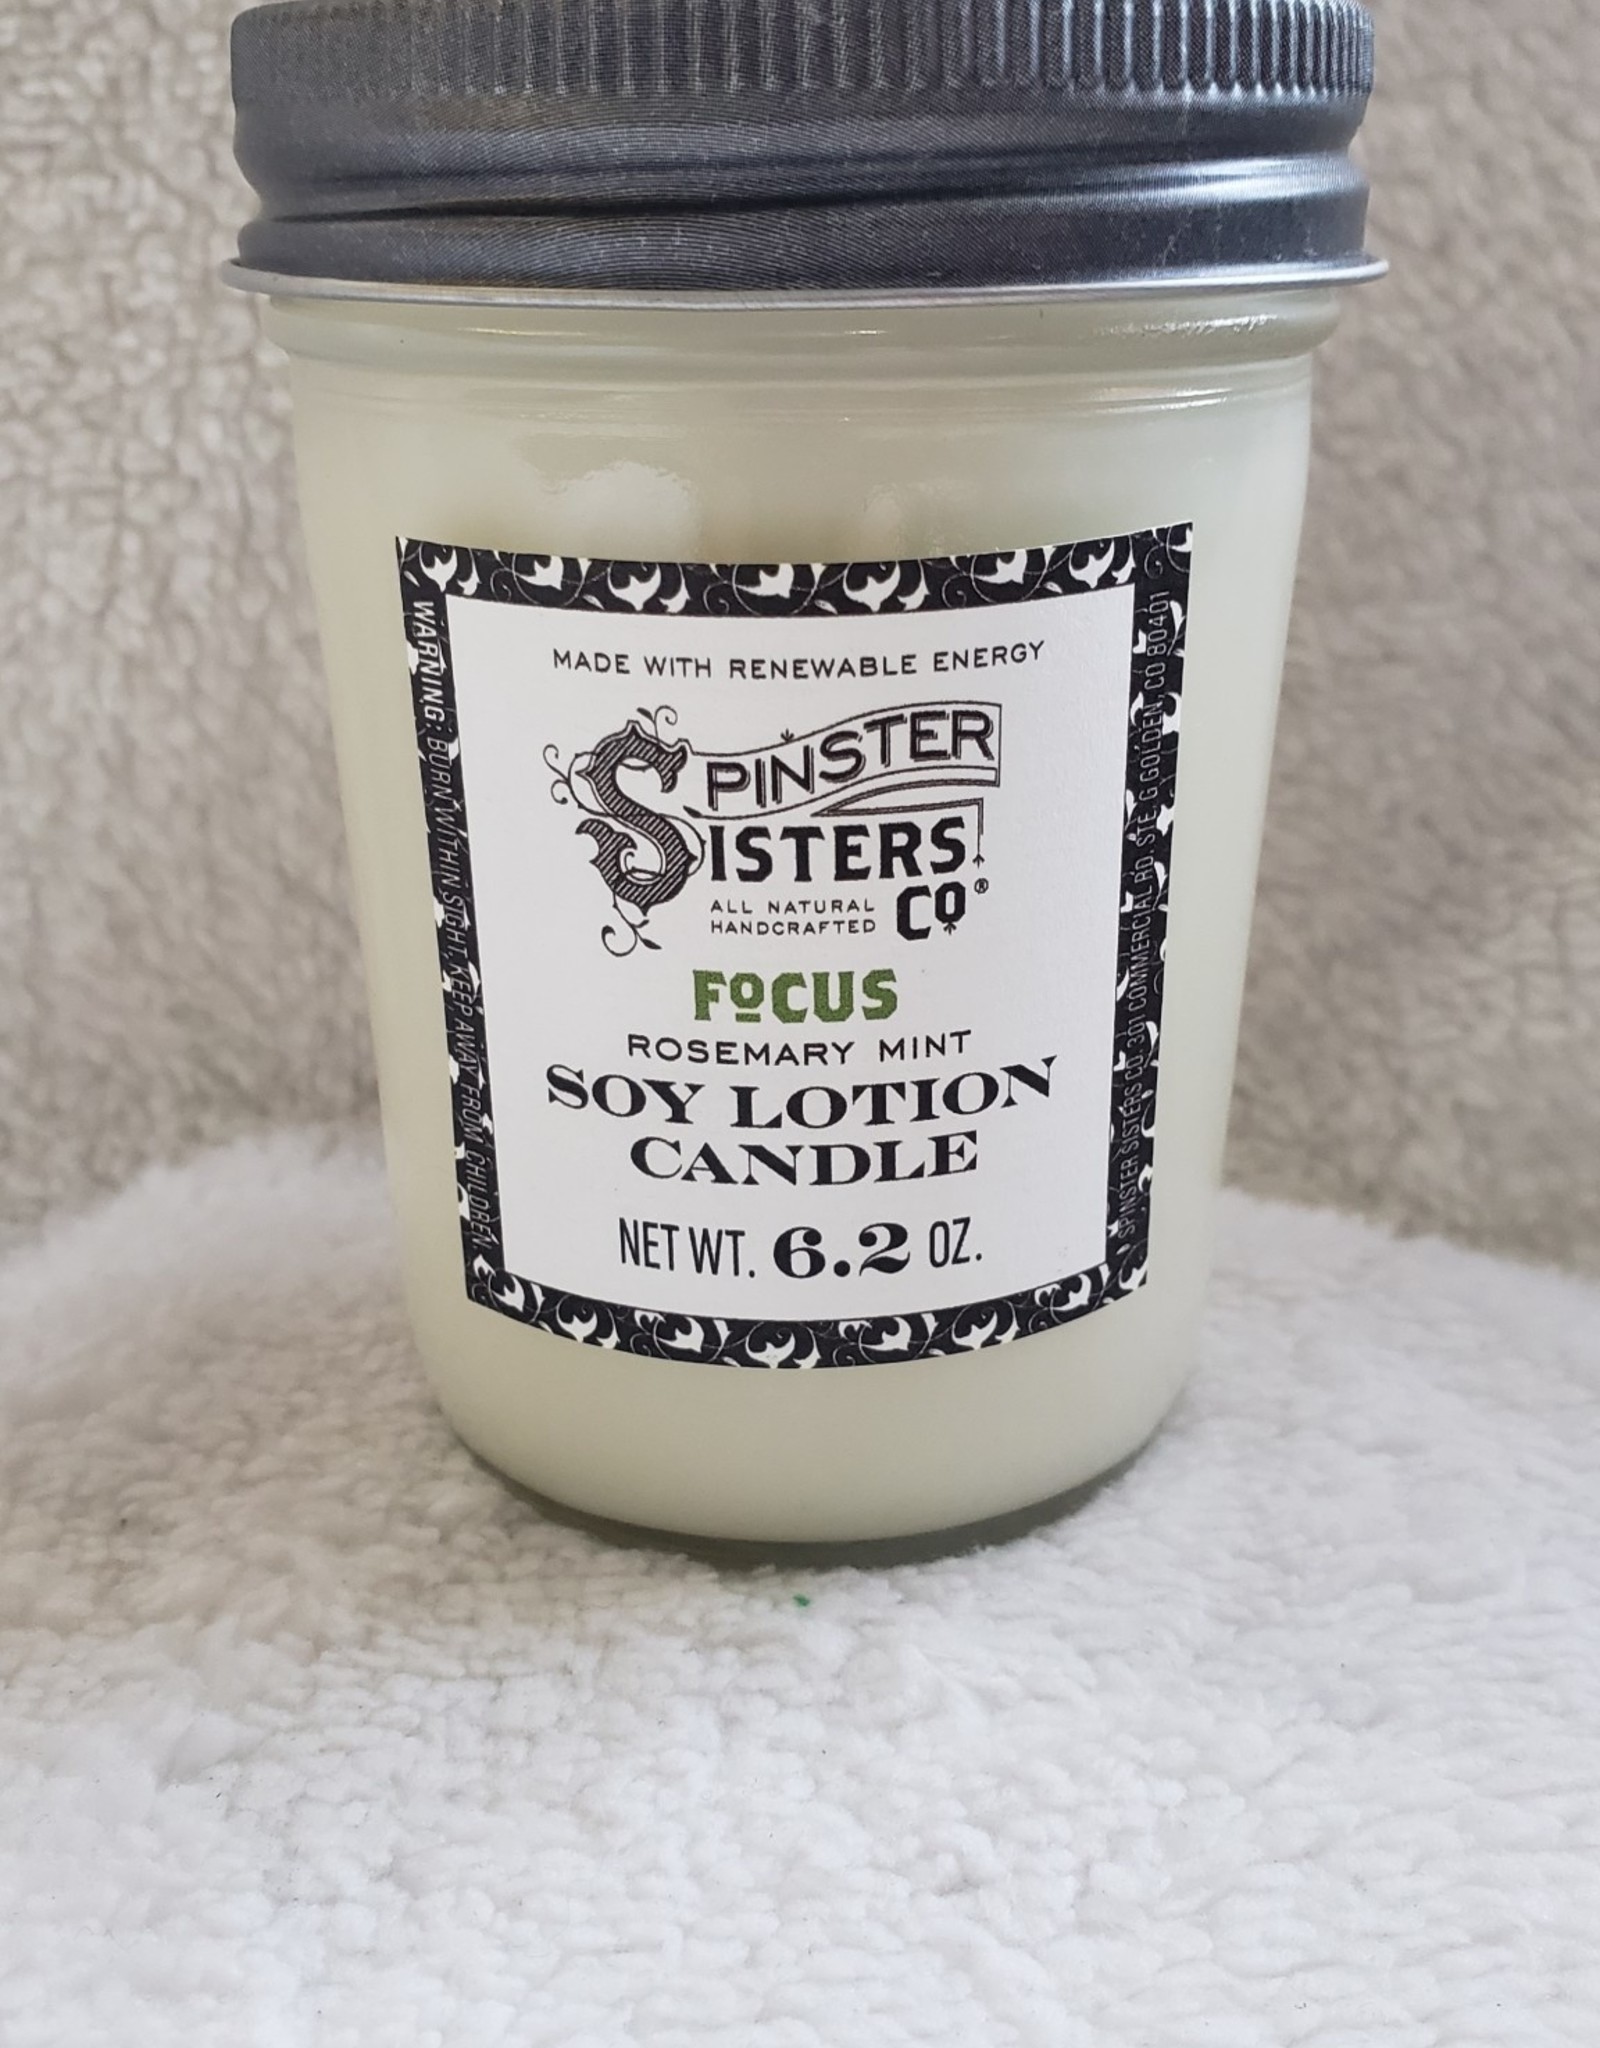 Spinster Sisters Co. Soy Lotion Candle 6.2 oz. | Focus